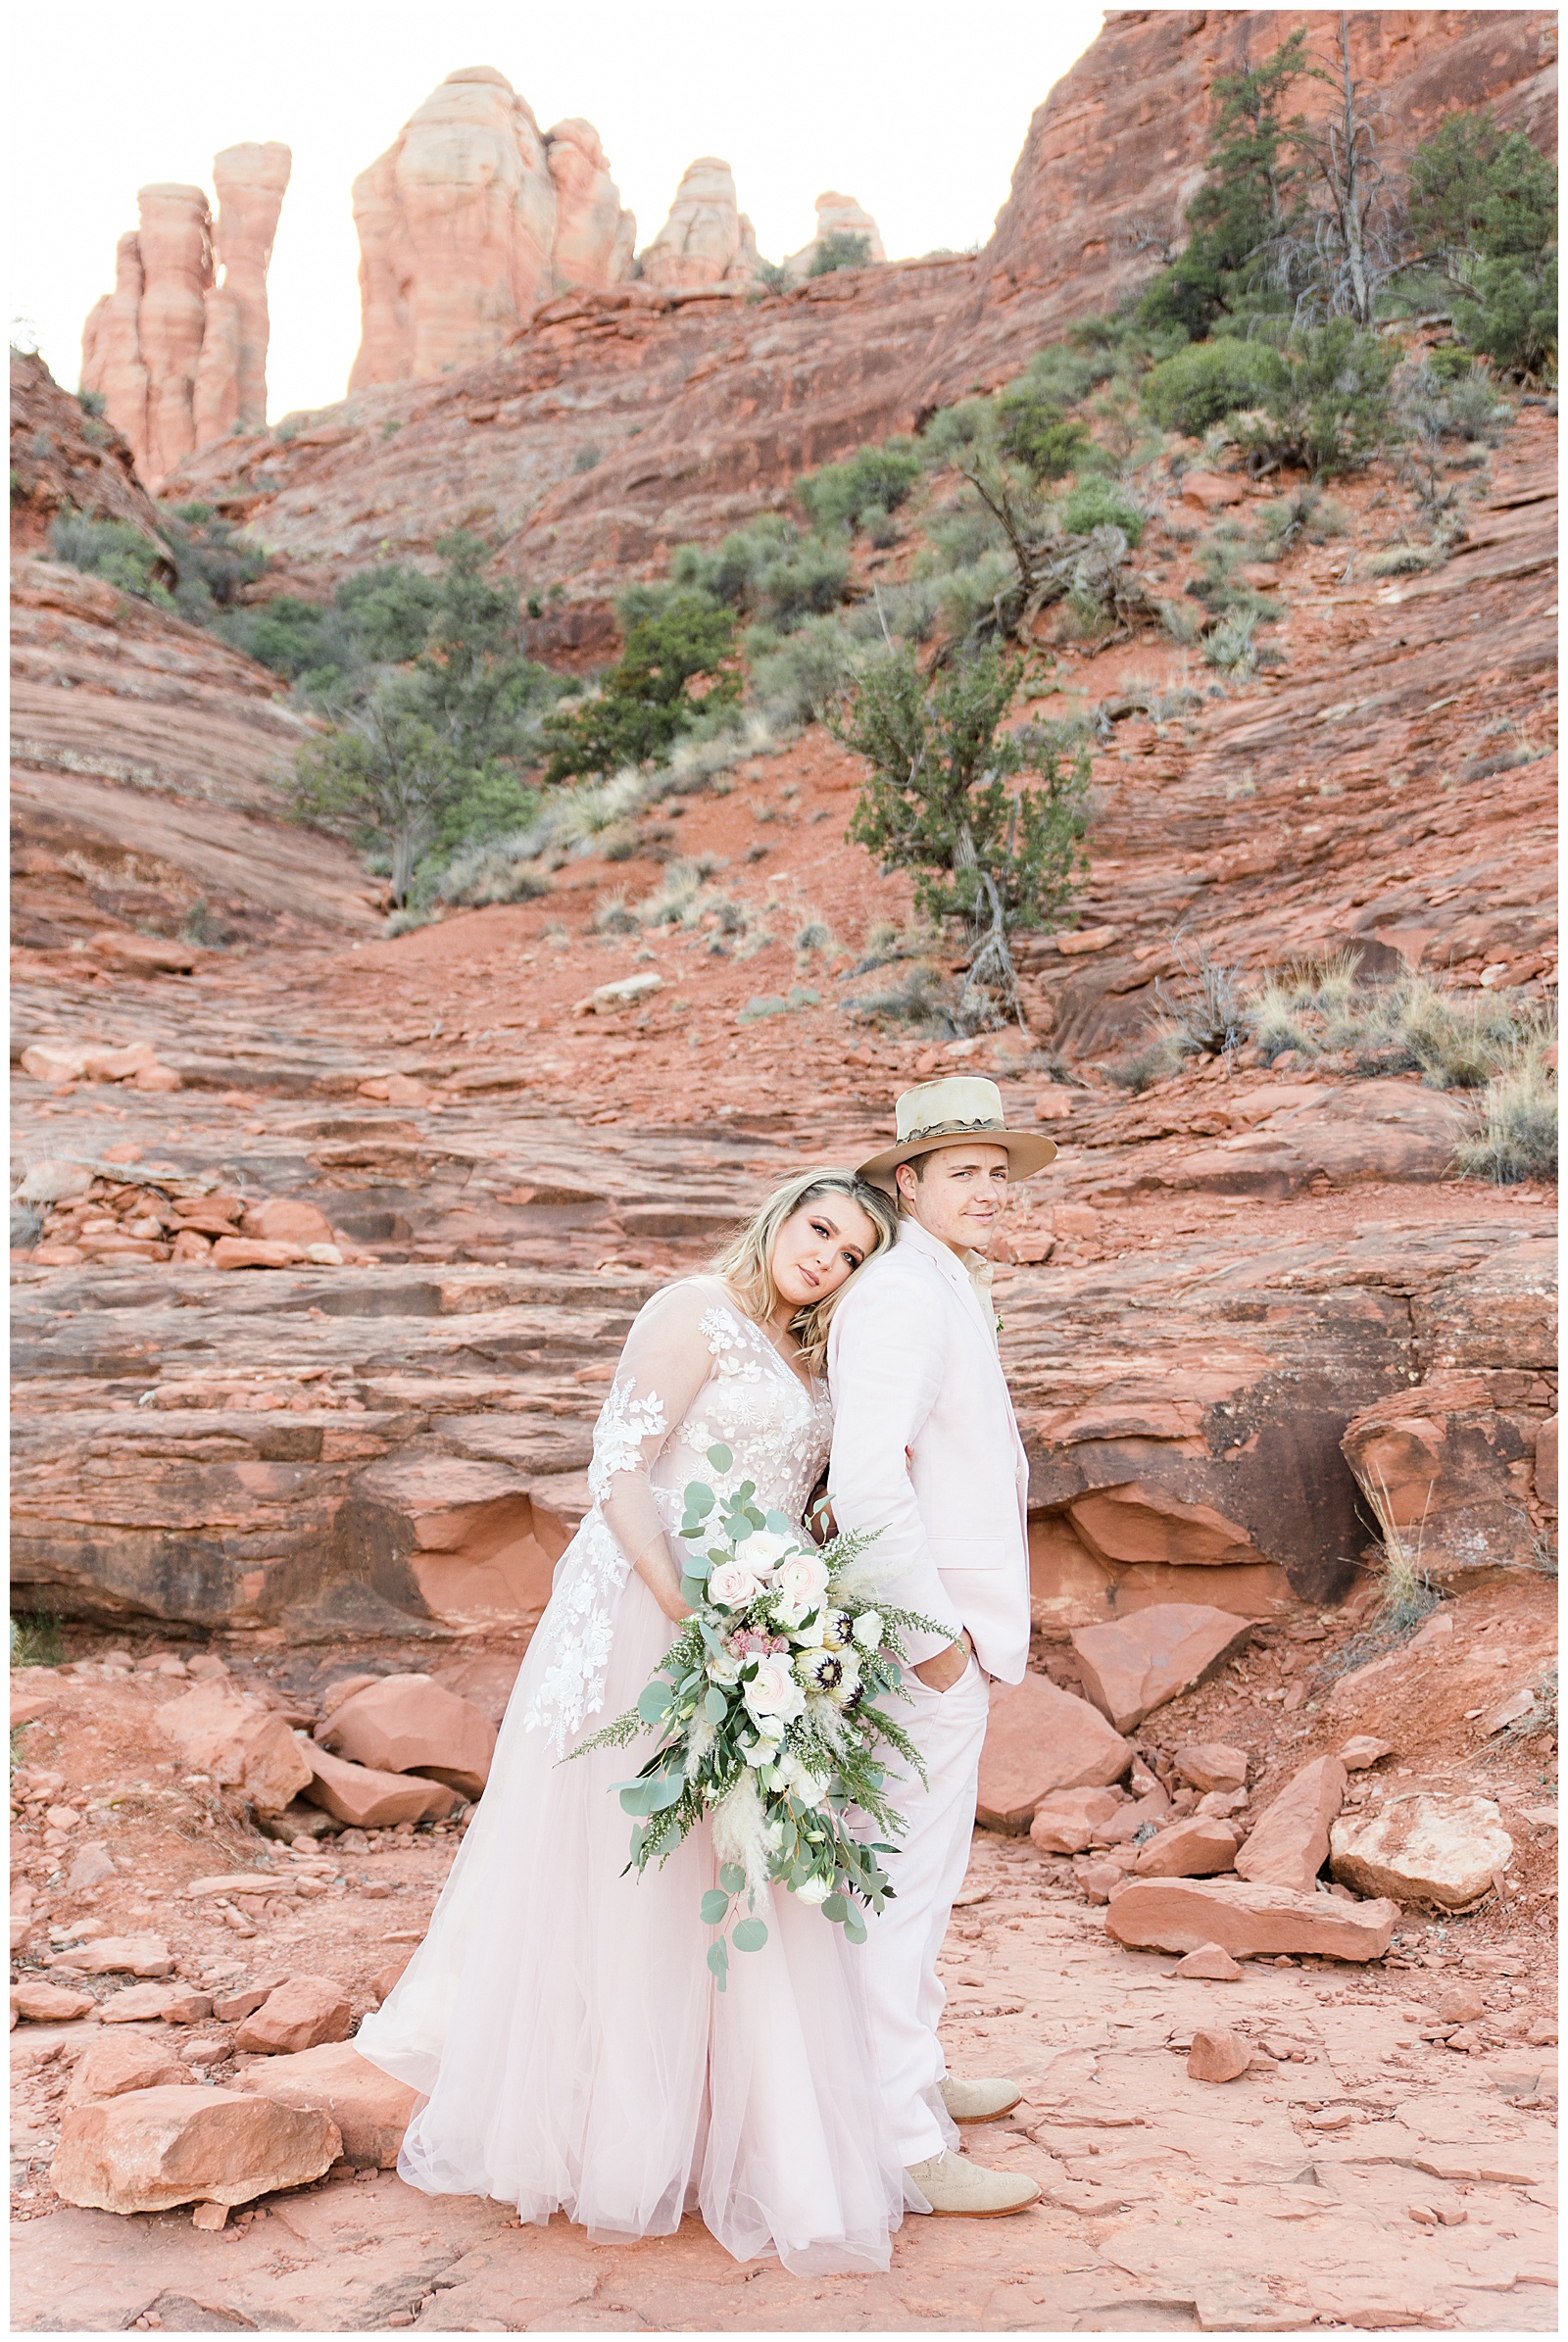 Bride leaning on groom's back in front of red rock formations